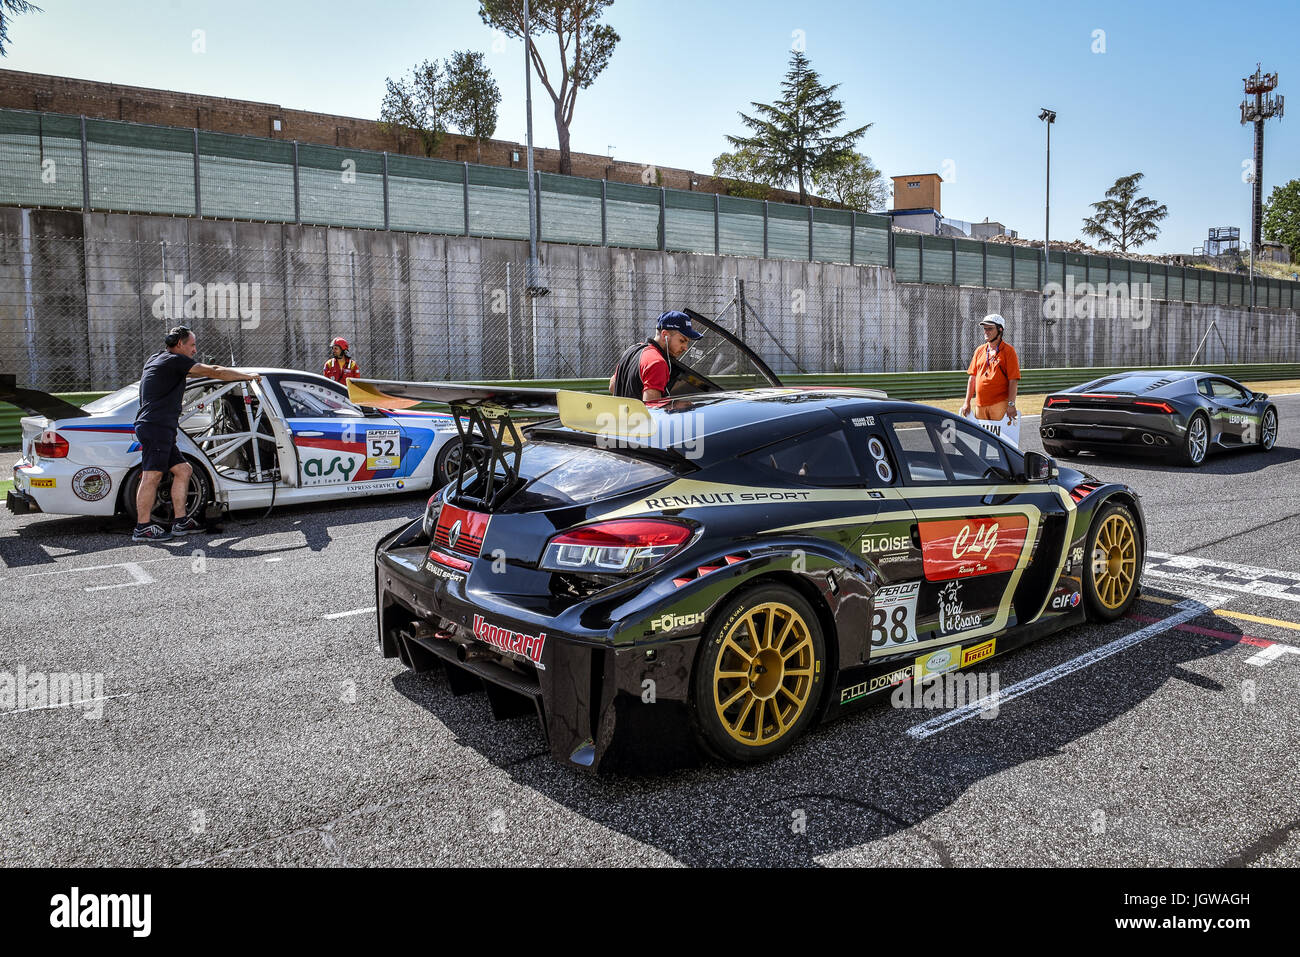 Italian Super Cup Renault Megane Trophy And Bmw M3 Cars On Starting Grid First Row Position Stock Photo Alamy